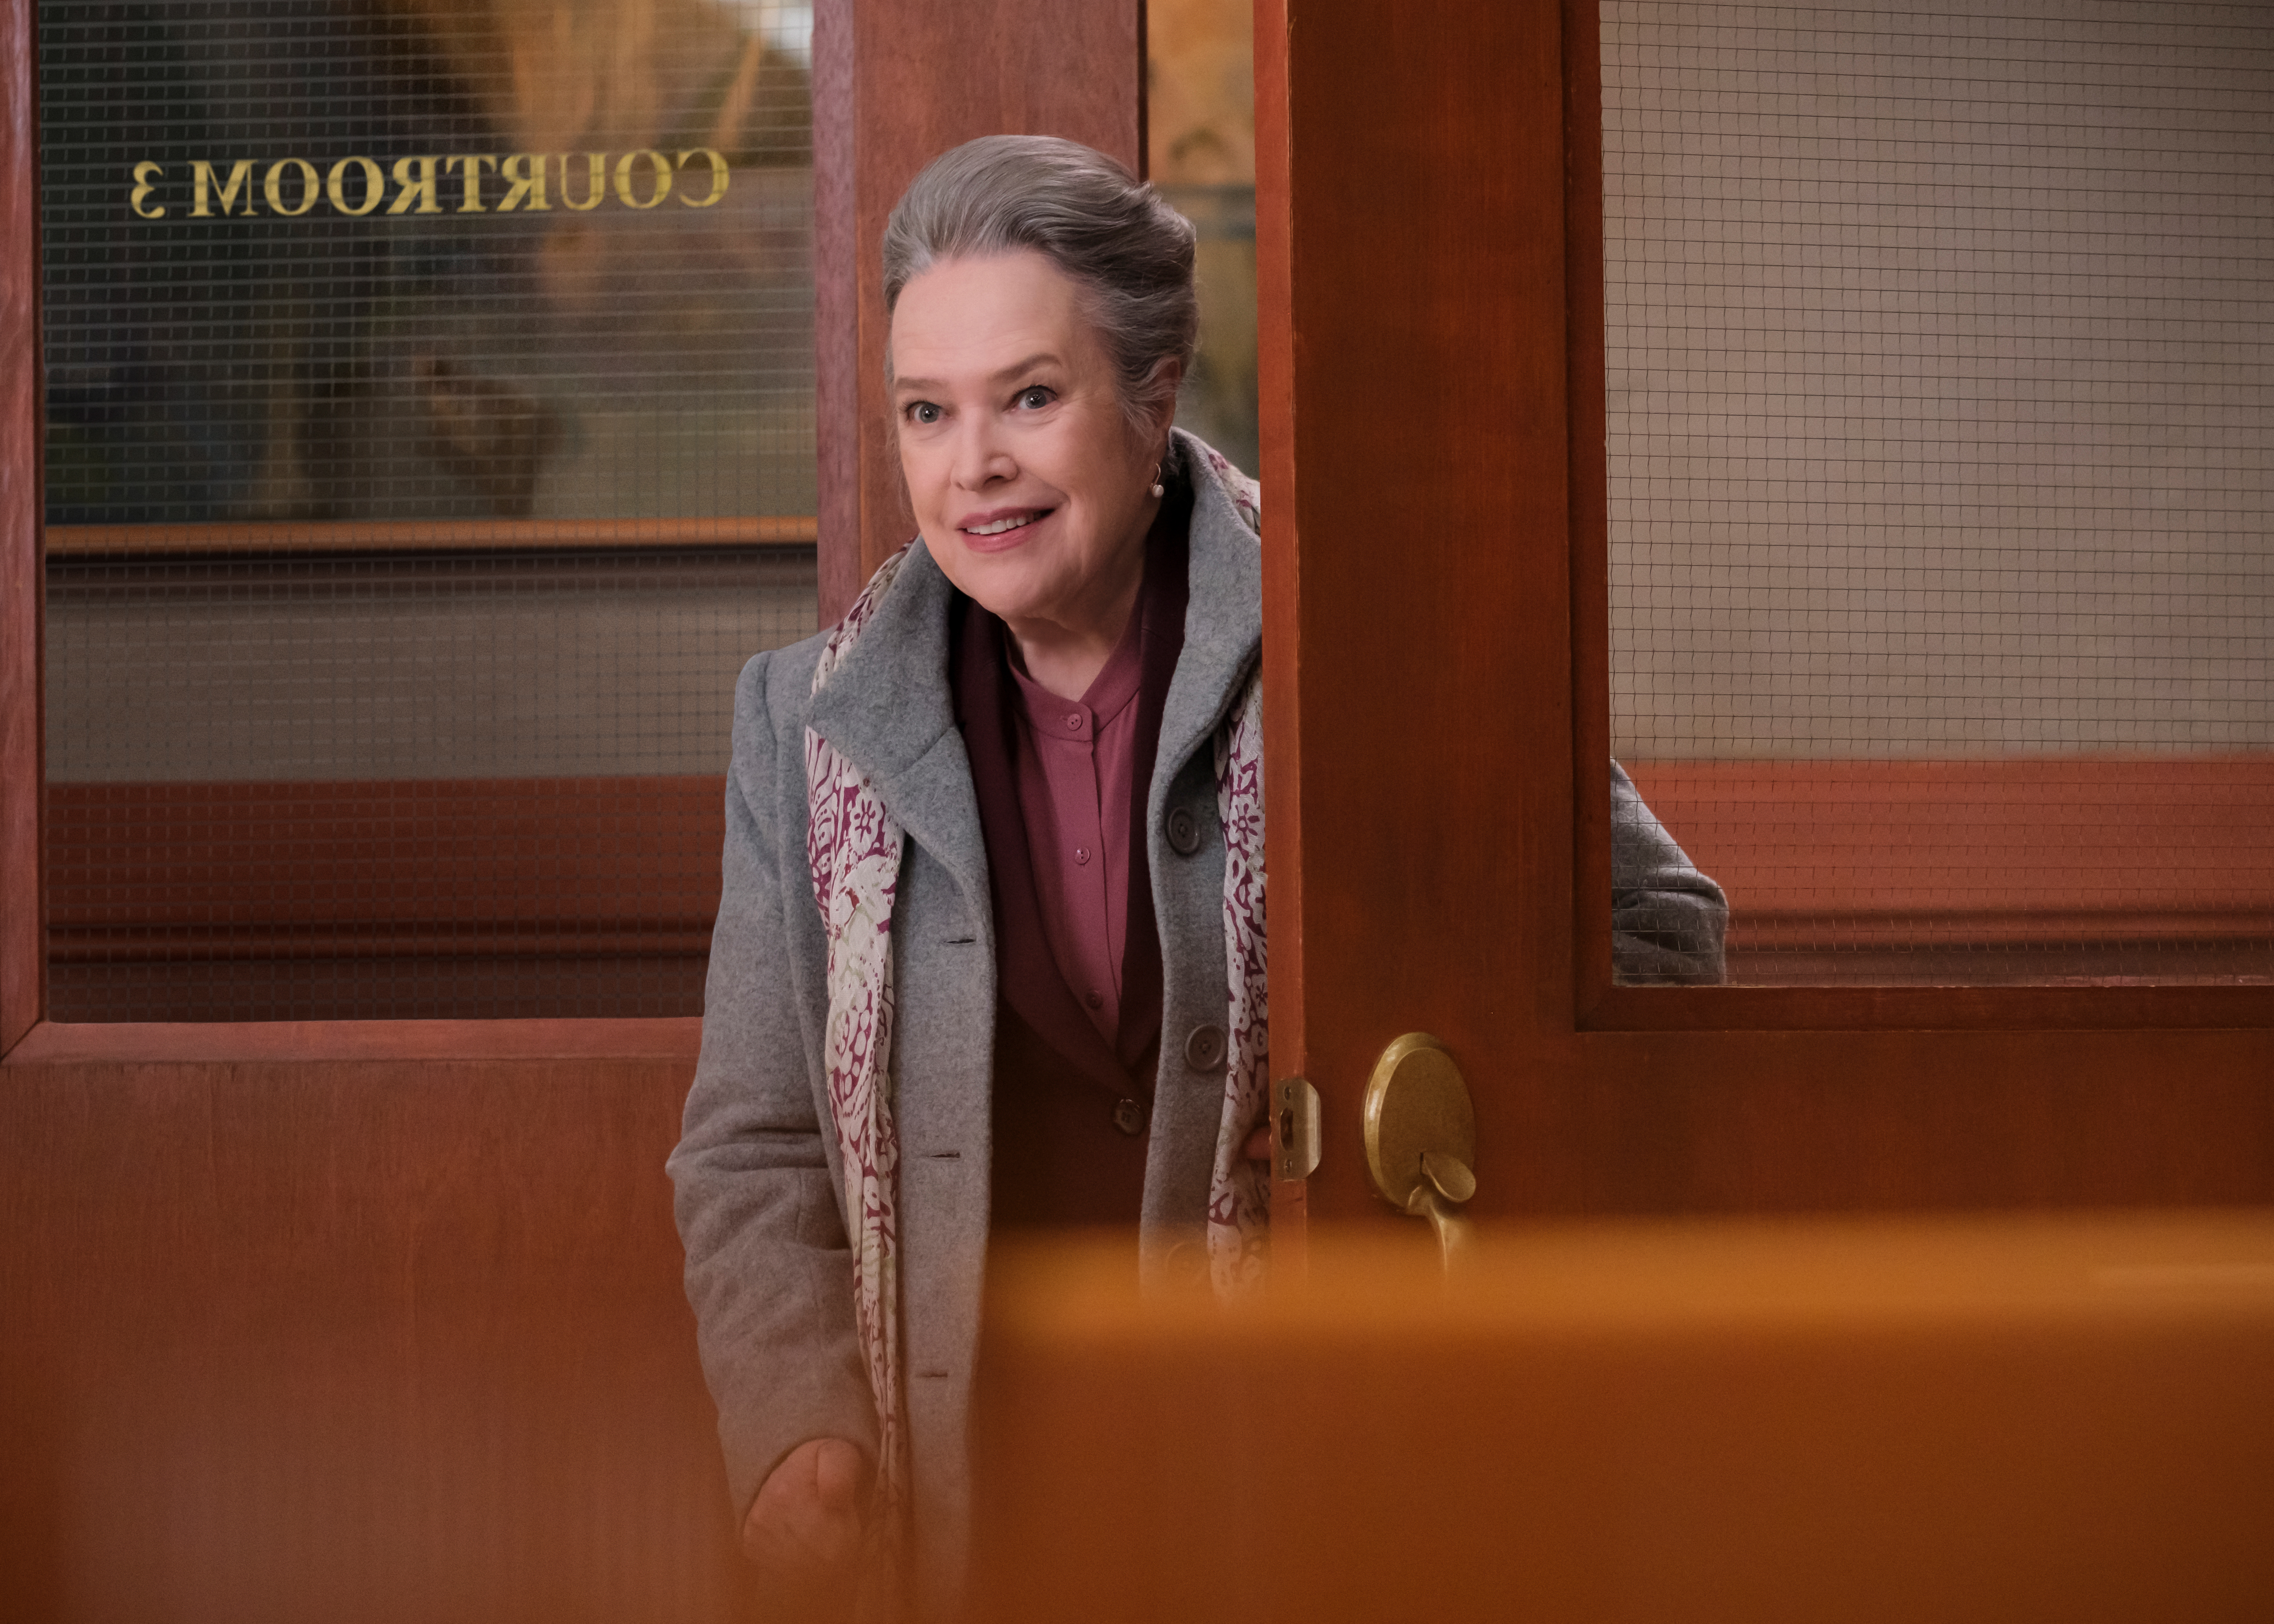 Kathy Bates stars as the brilliant septuagenarian Madeline Matlock in the new drama series, "Matlock," inspired by the classic television series of the same name. | Source: Getty Images